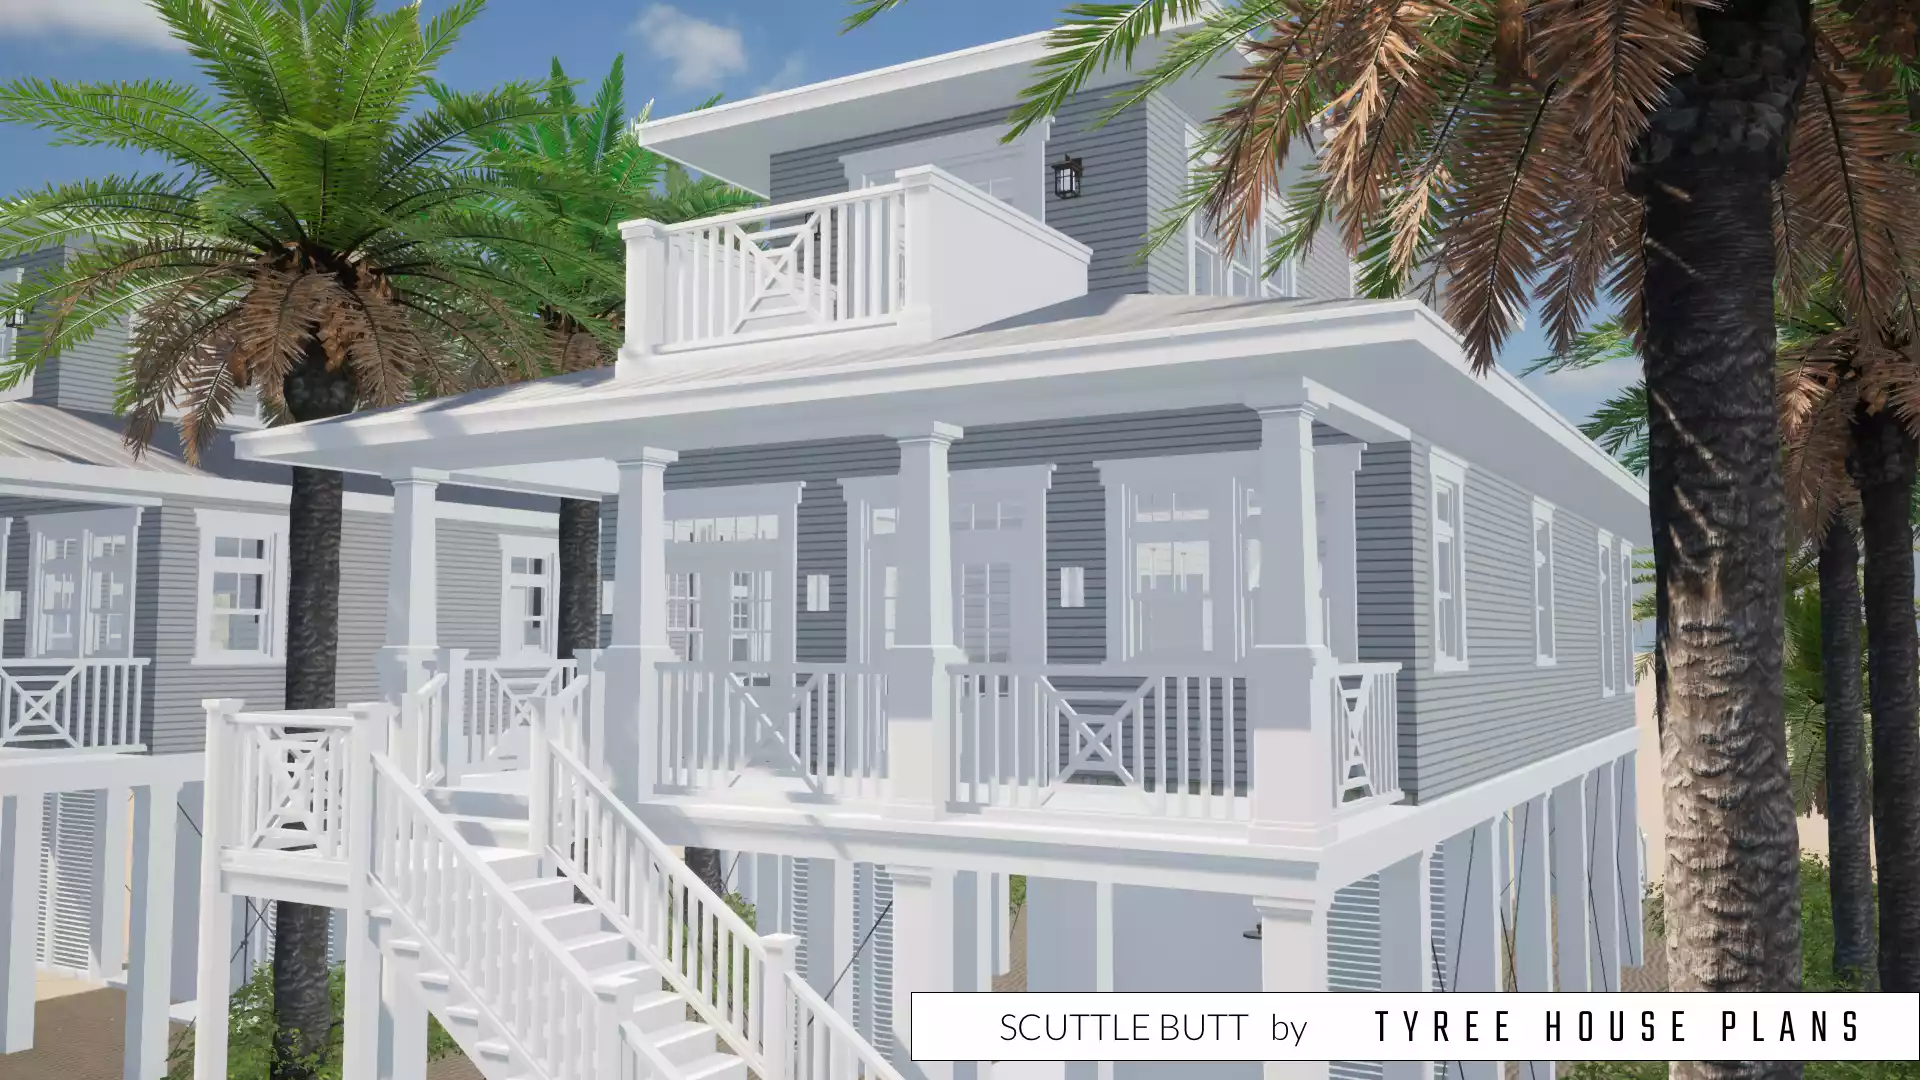 Rear porch with sundeck above. Scuttle Butt by Tyree House Plans.